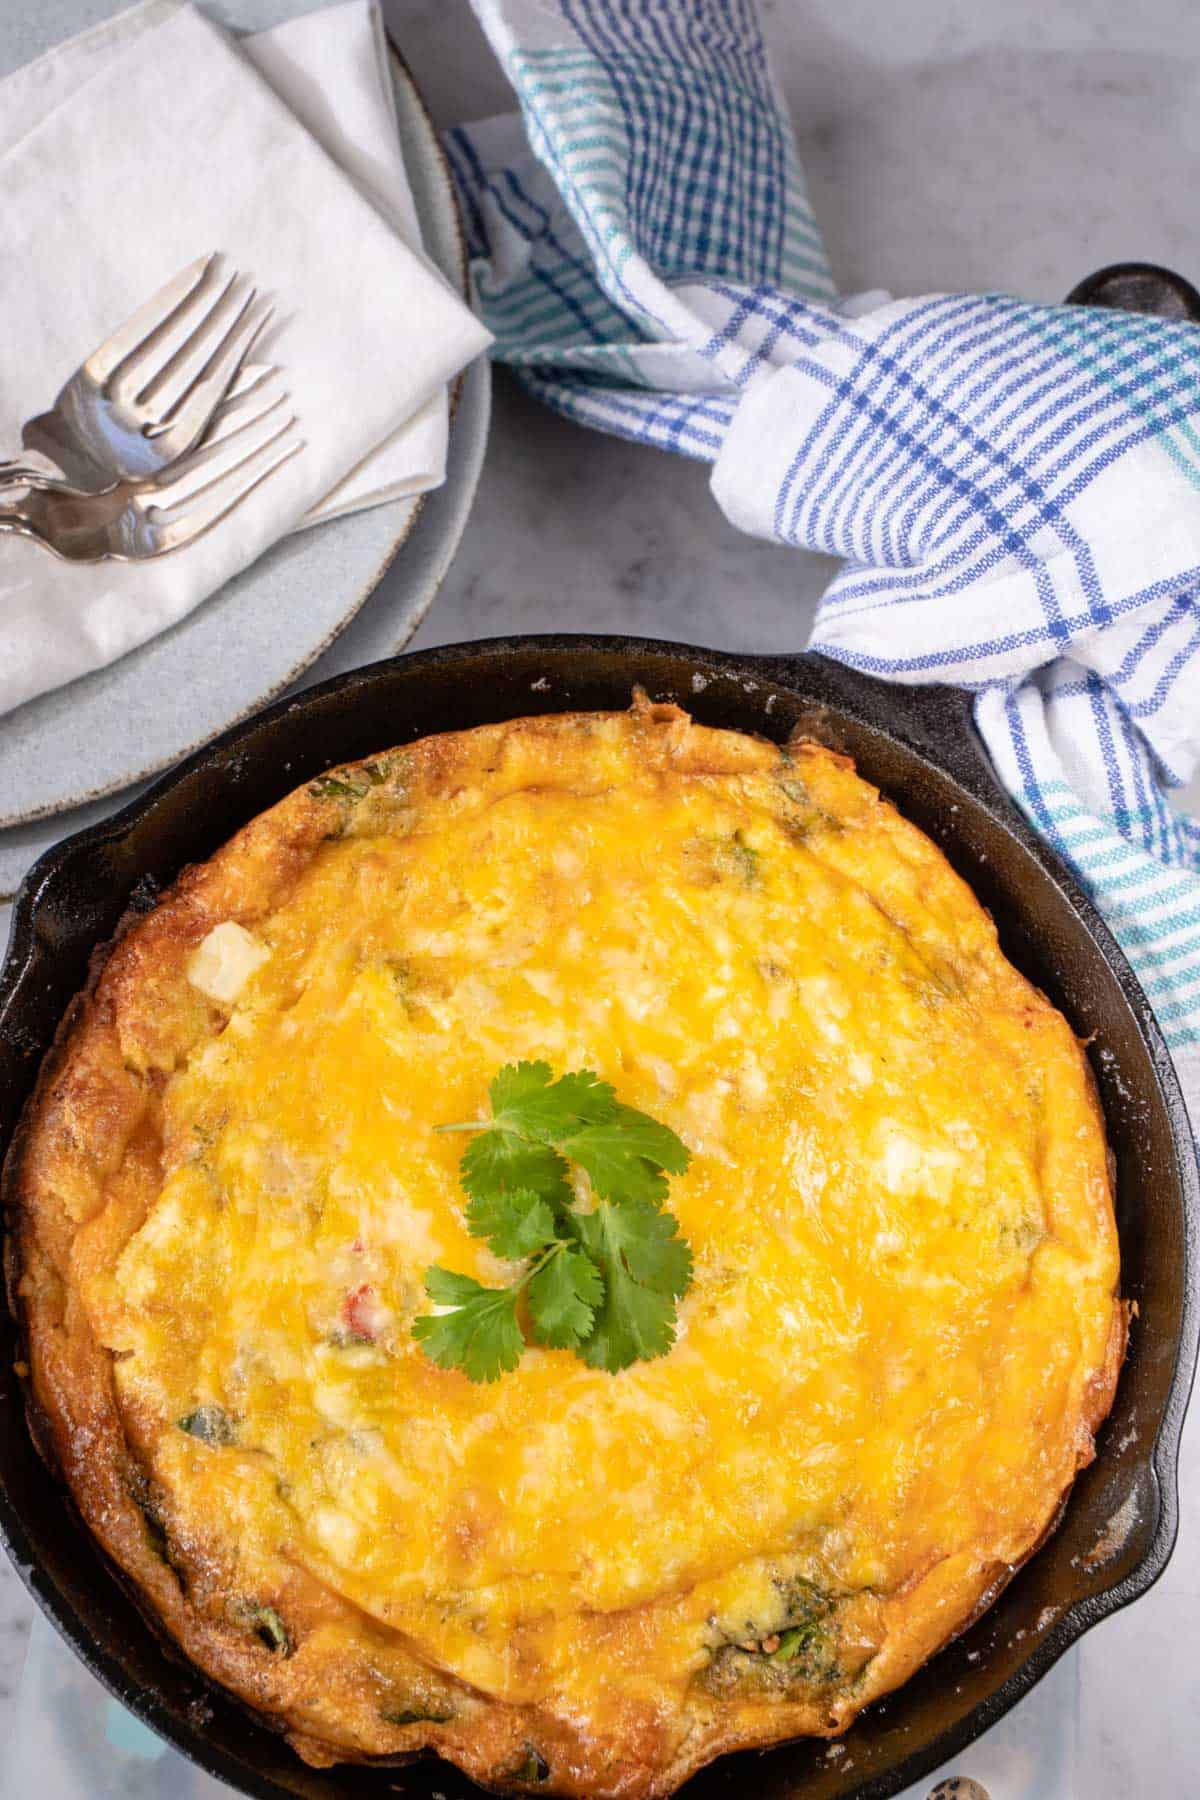 Frittata for two in a cast iron skillet with 2 plates ,forks and napkins resting next to the frittata